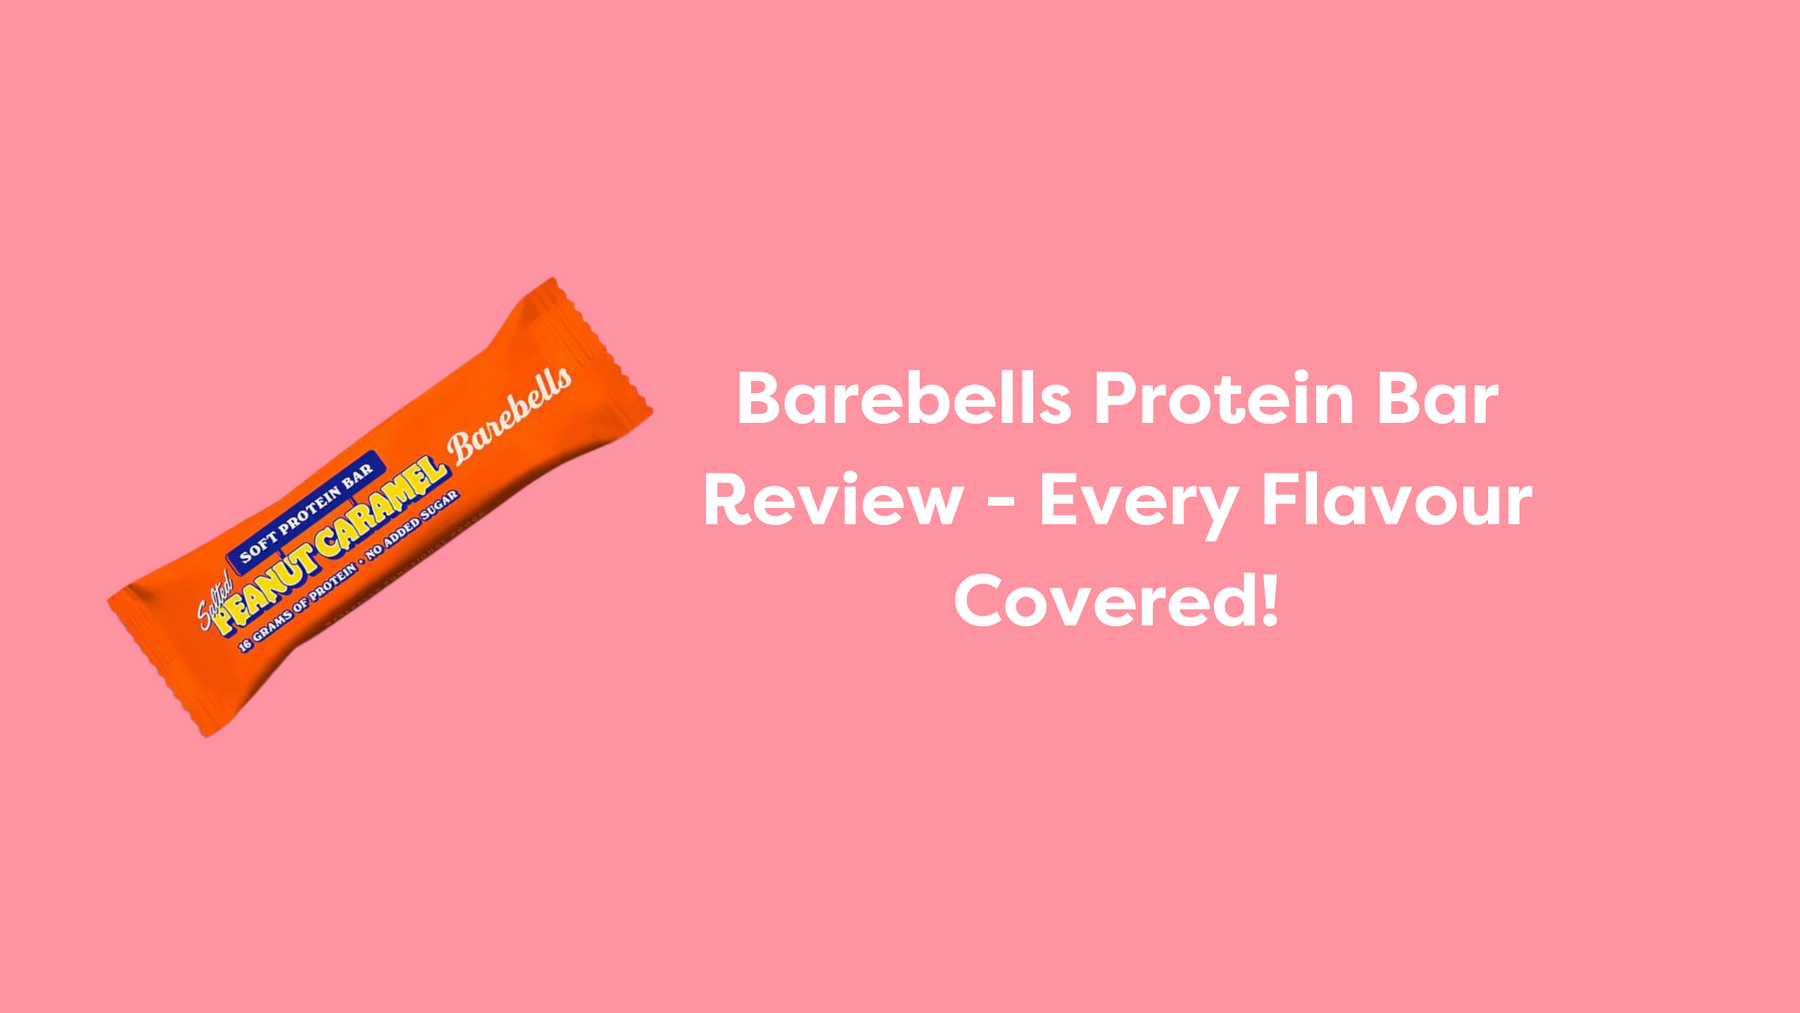 Barebells Protein Bar Review - Every Flavour Covered!